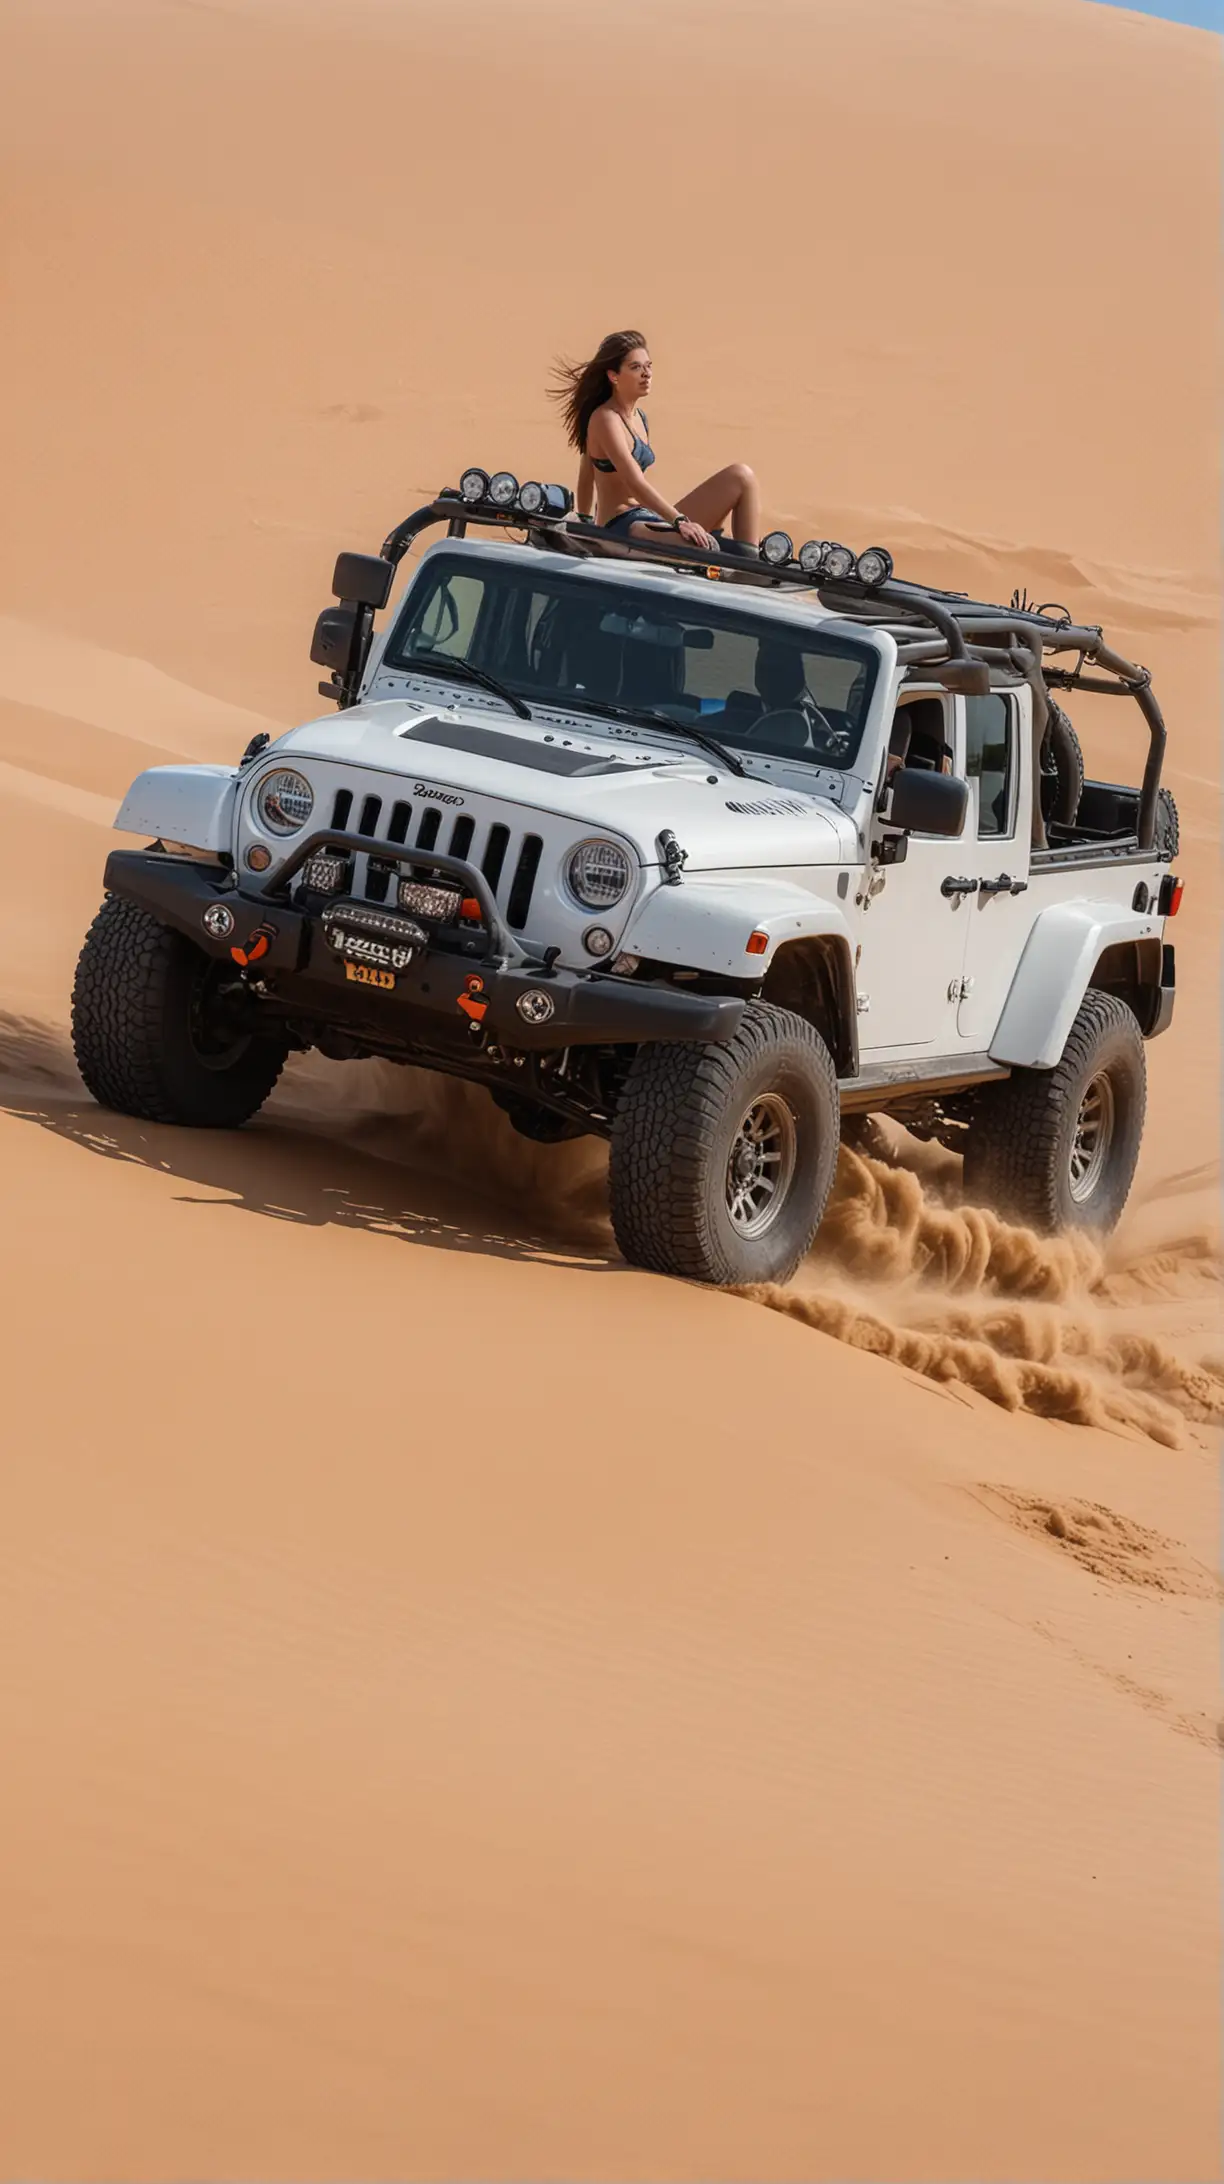 Jeep Riding Adventure in Desert Sands with Beautiful Driver